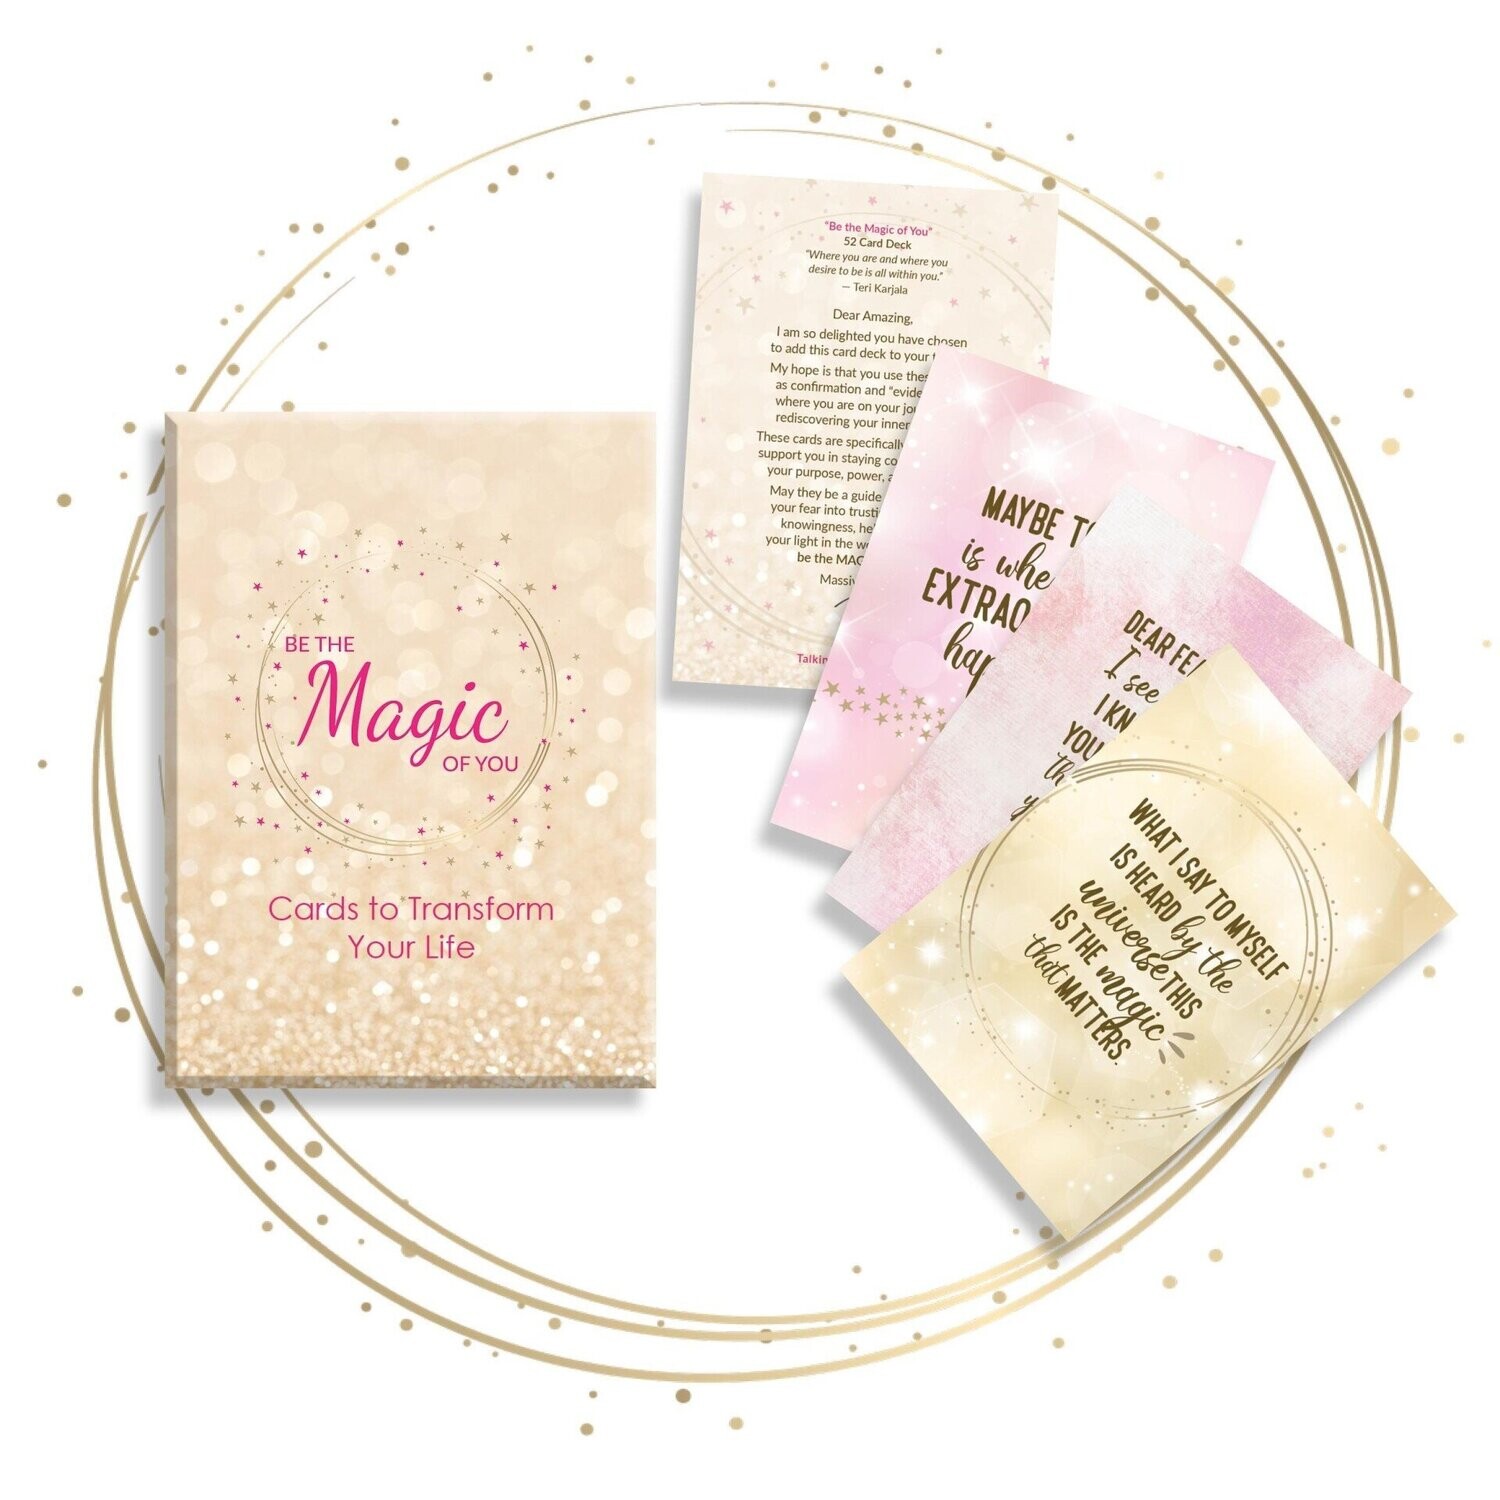 Be the Magic of You 52-Card Deck